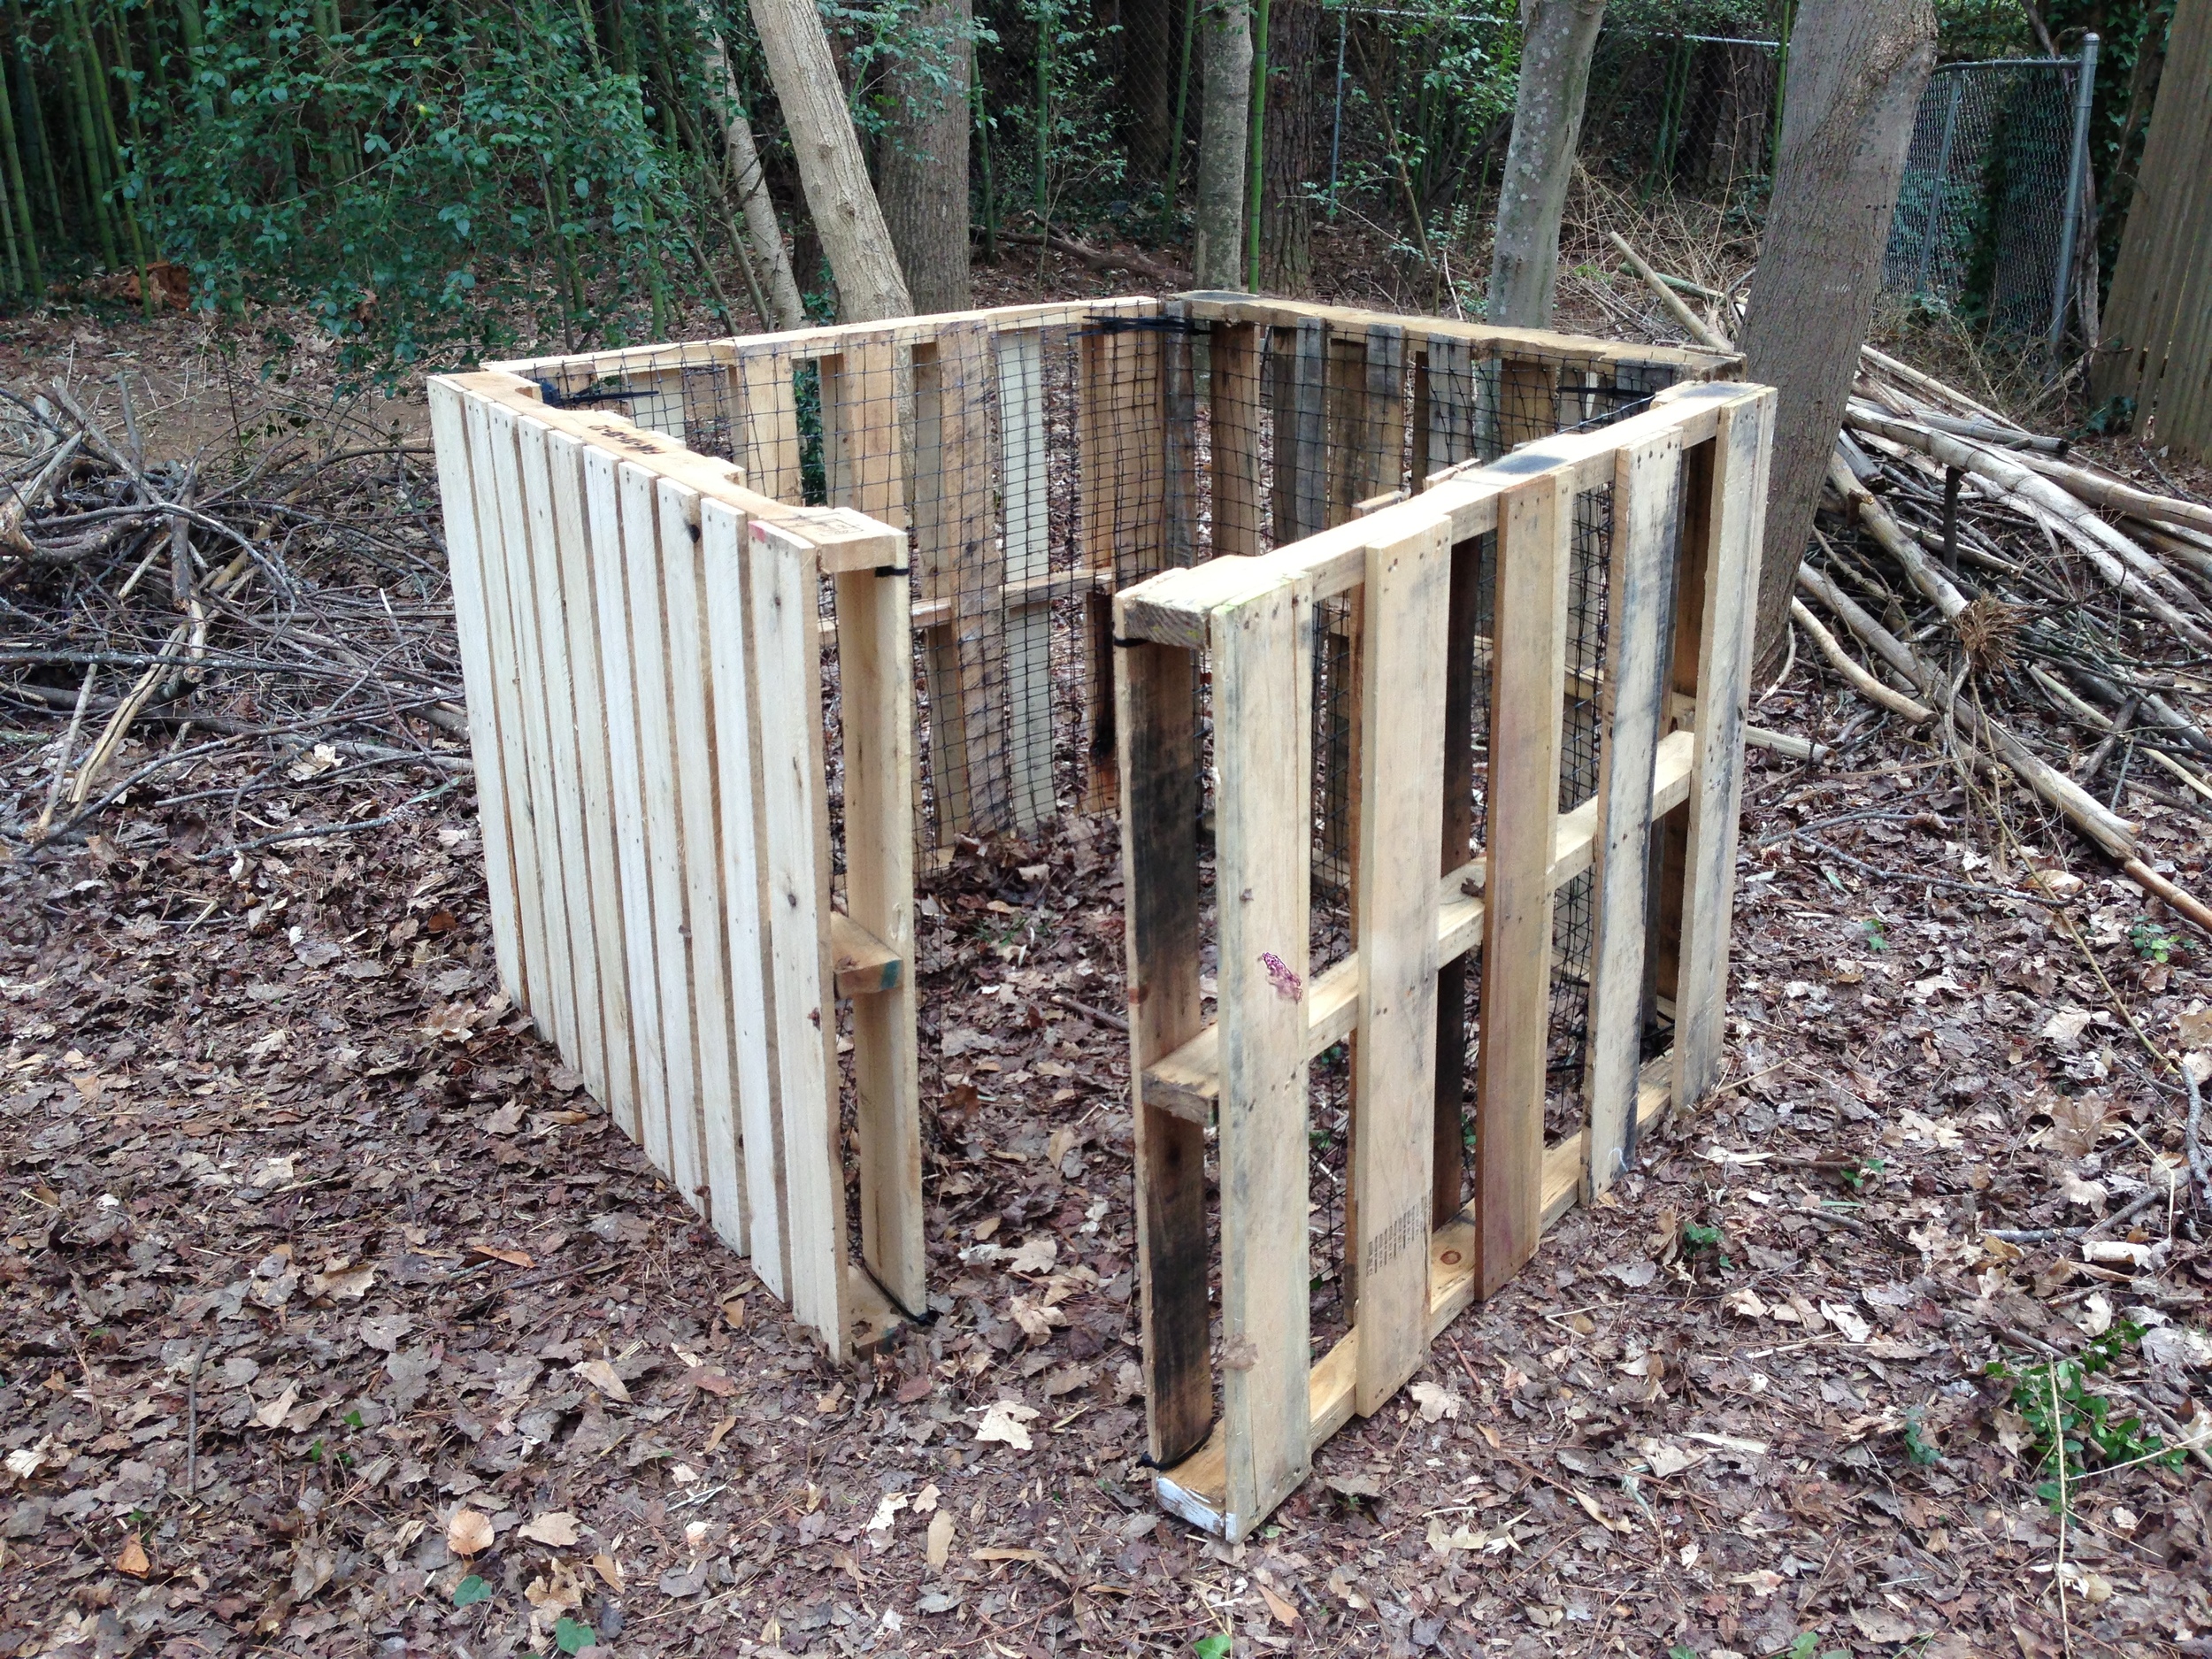 A gate opens to make turning and removal easier.